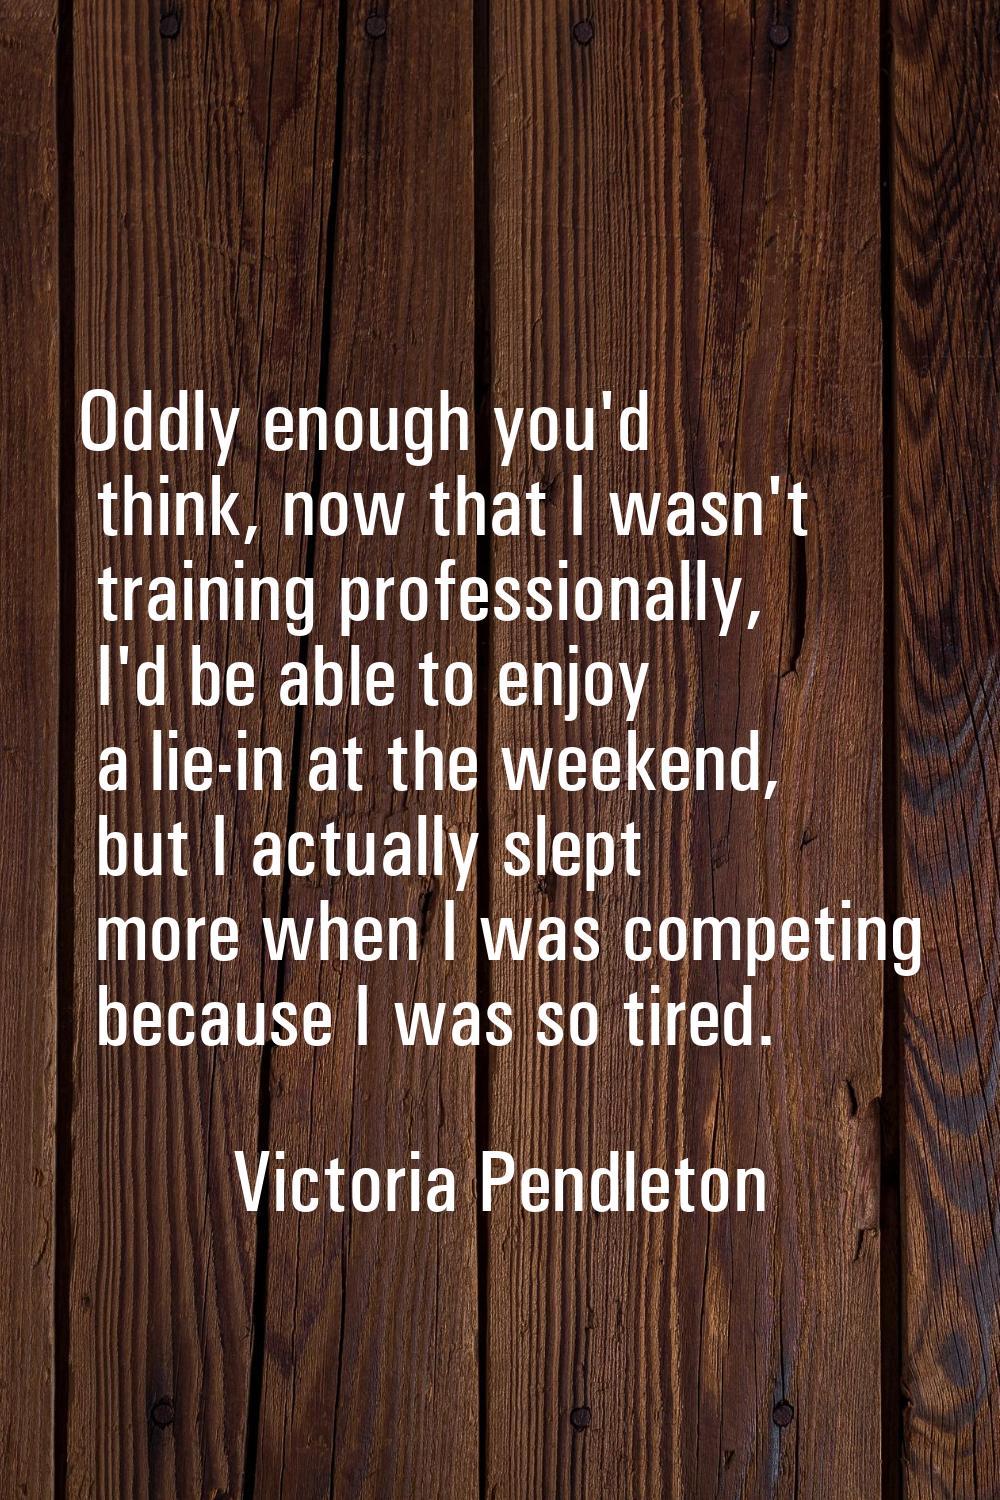 Oddly enough you'd think, now that I wasn't training professionally, I'd be able to enjoy a lie-in 